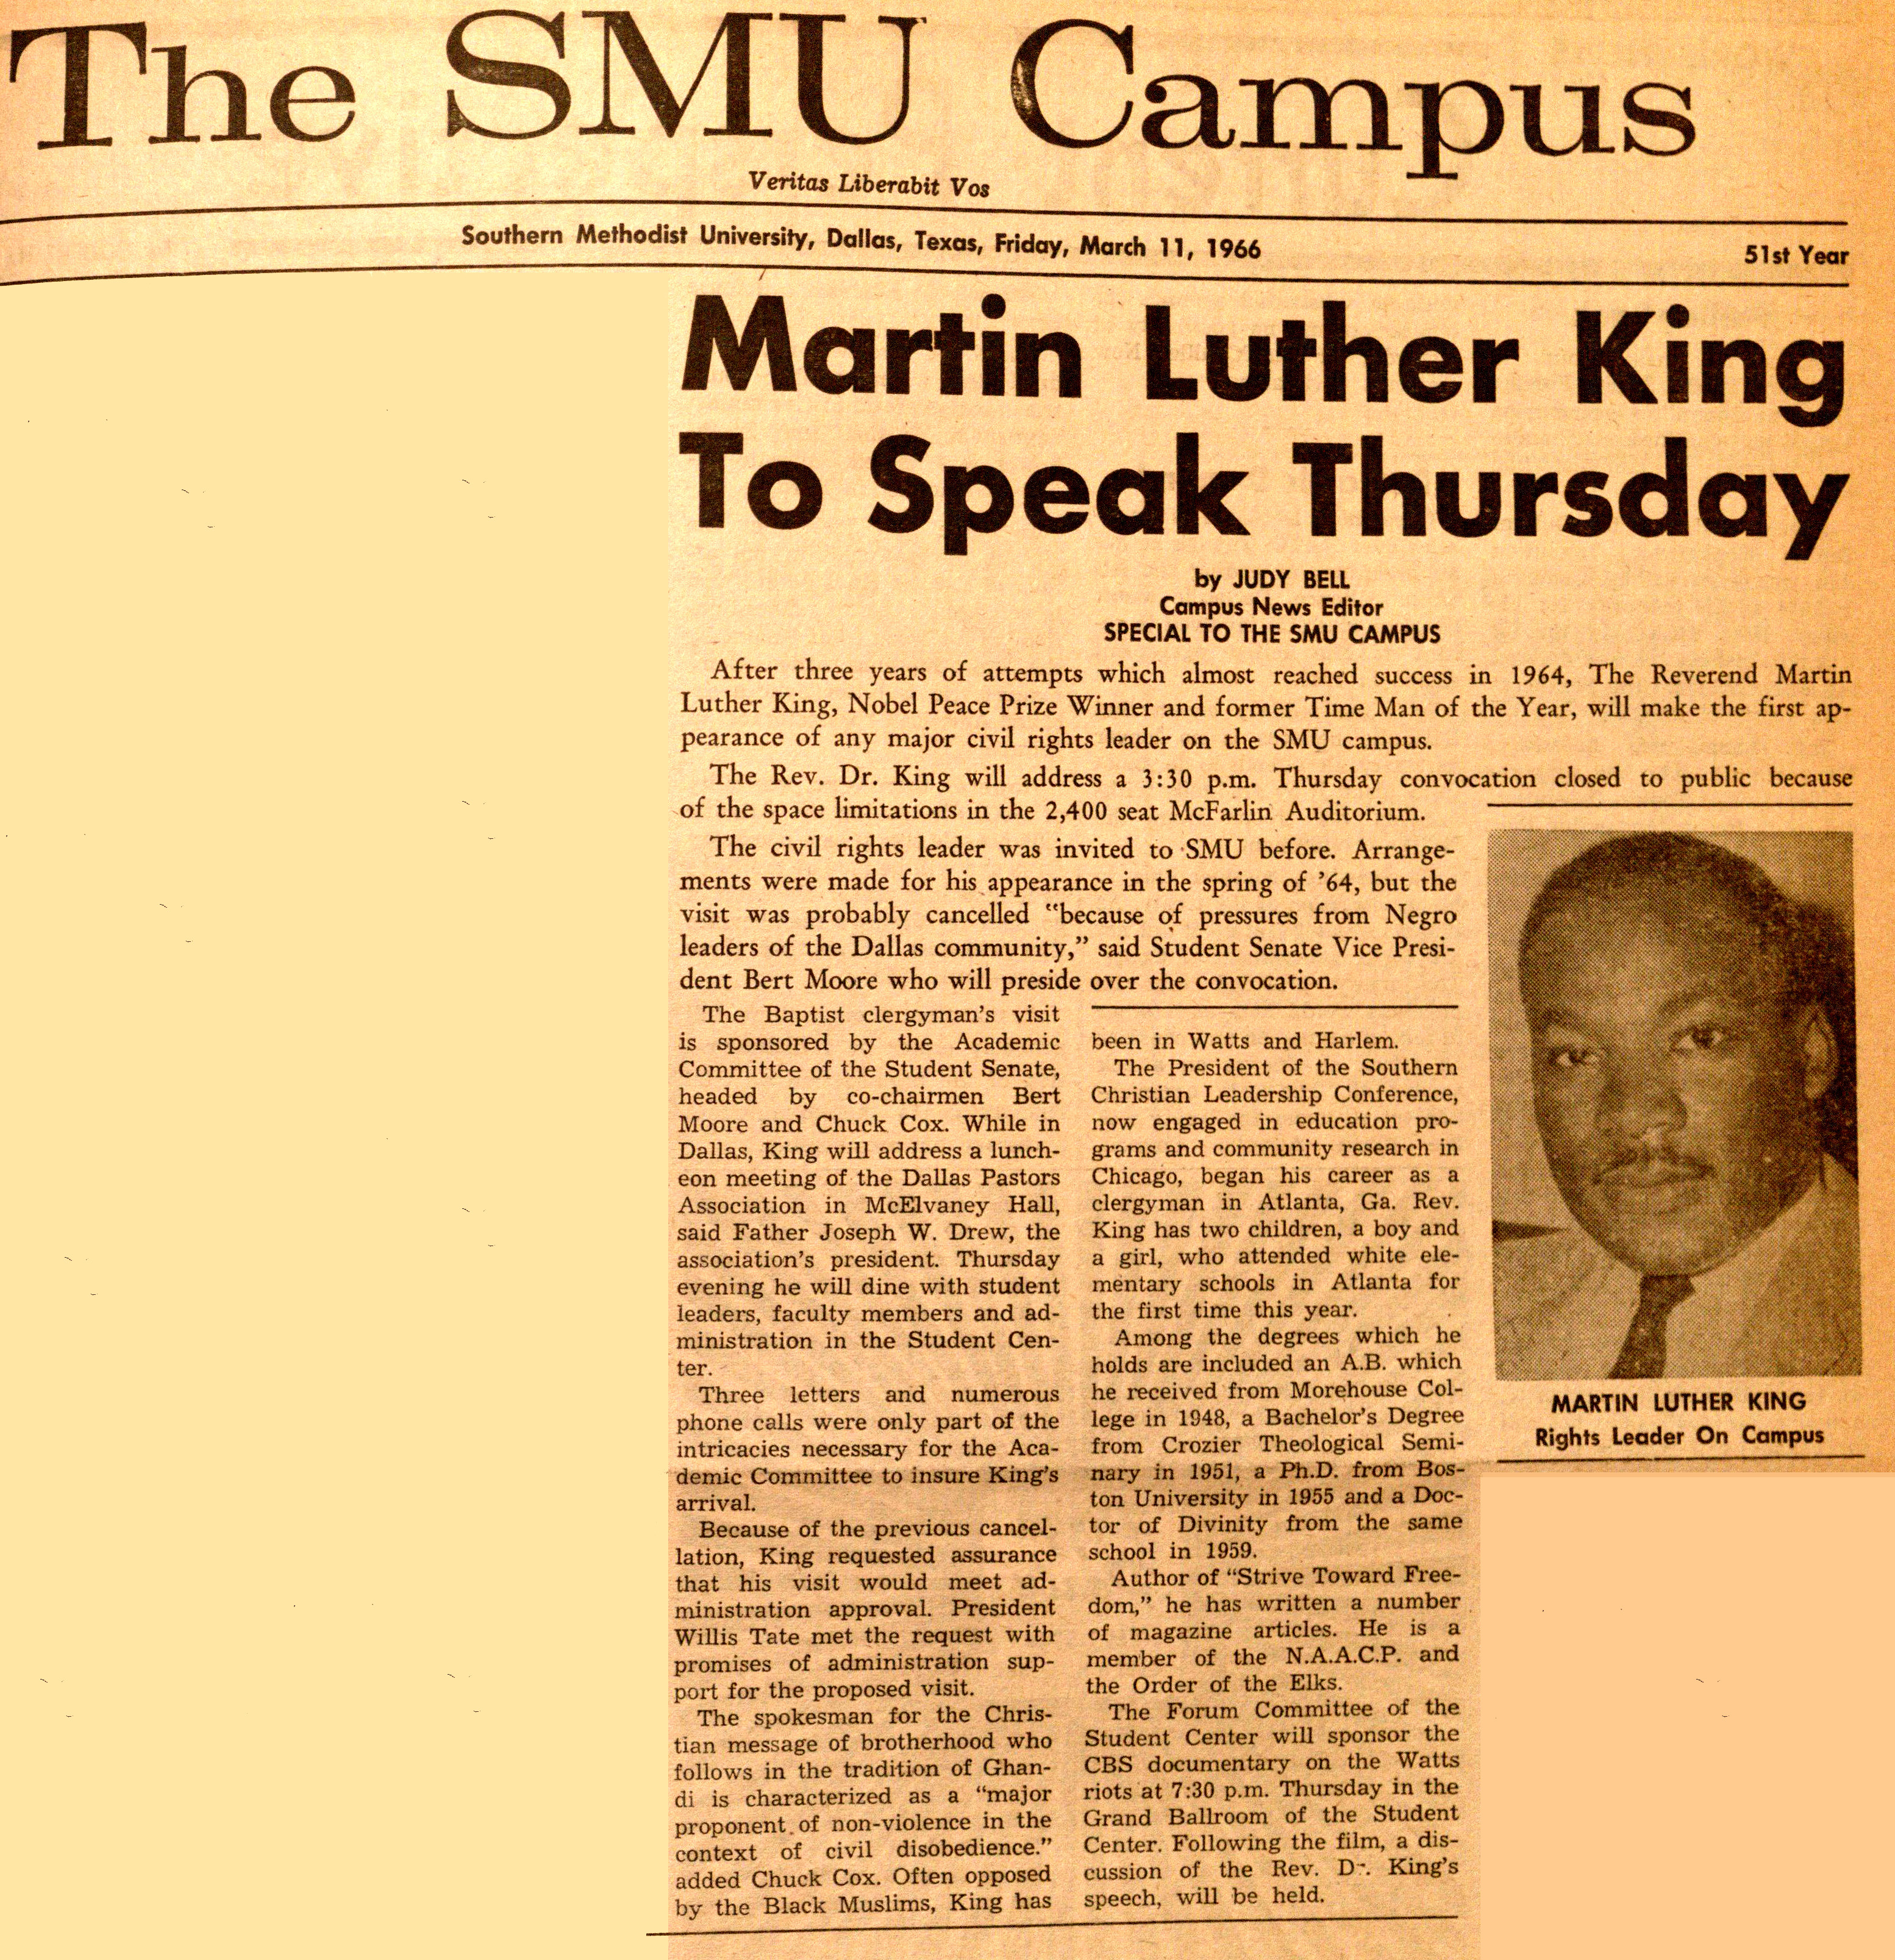 Dr. Martin Luther King Jr. at SMU in 1966